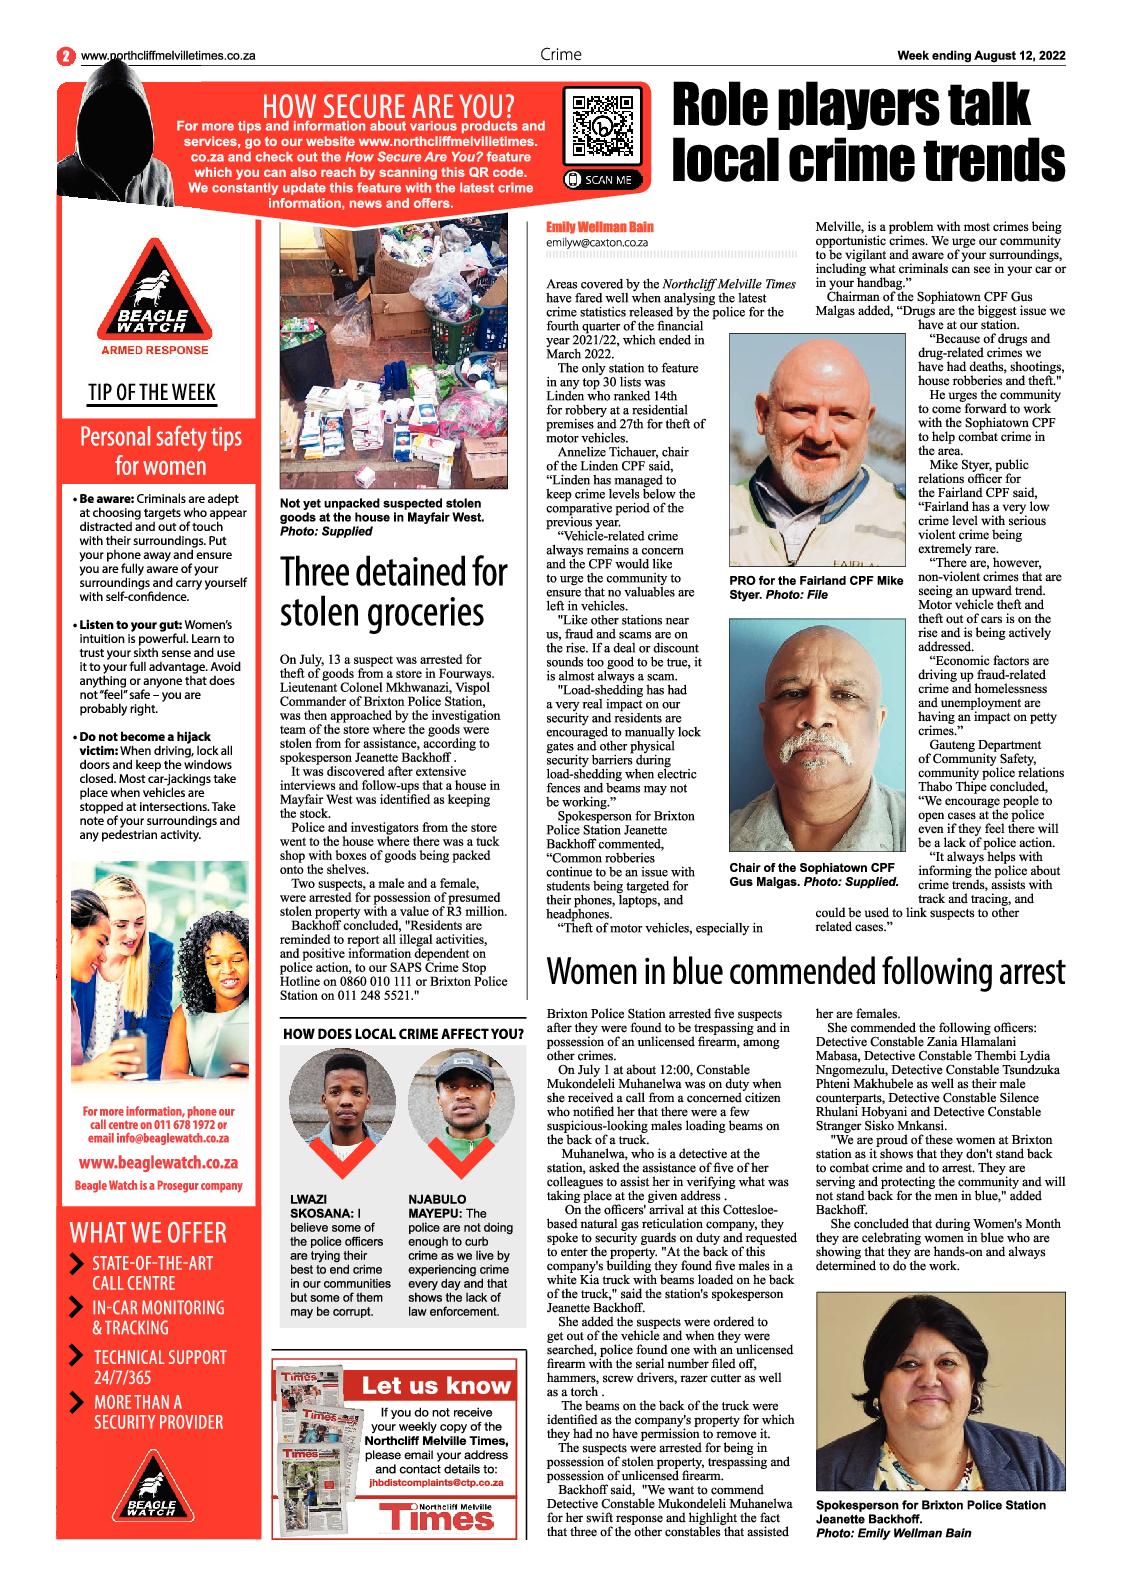 Northcliff Melville Times August 12 2022 page 2